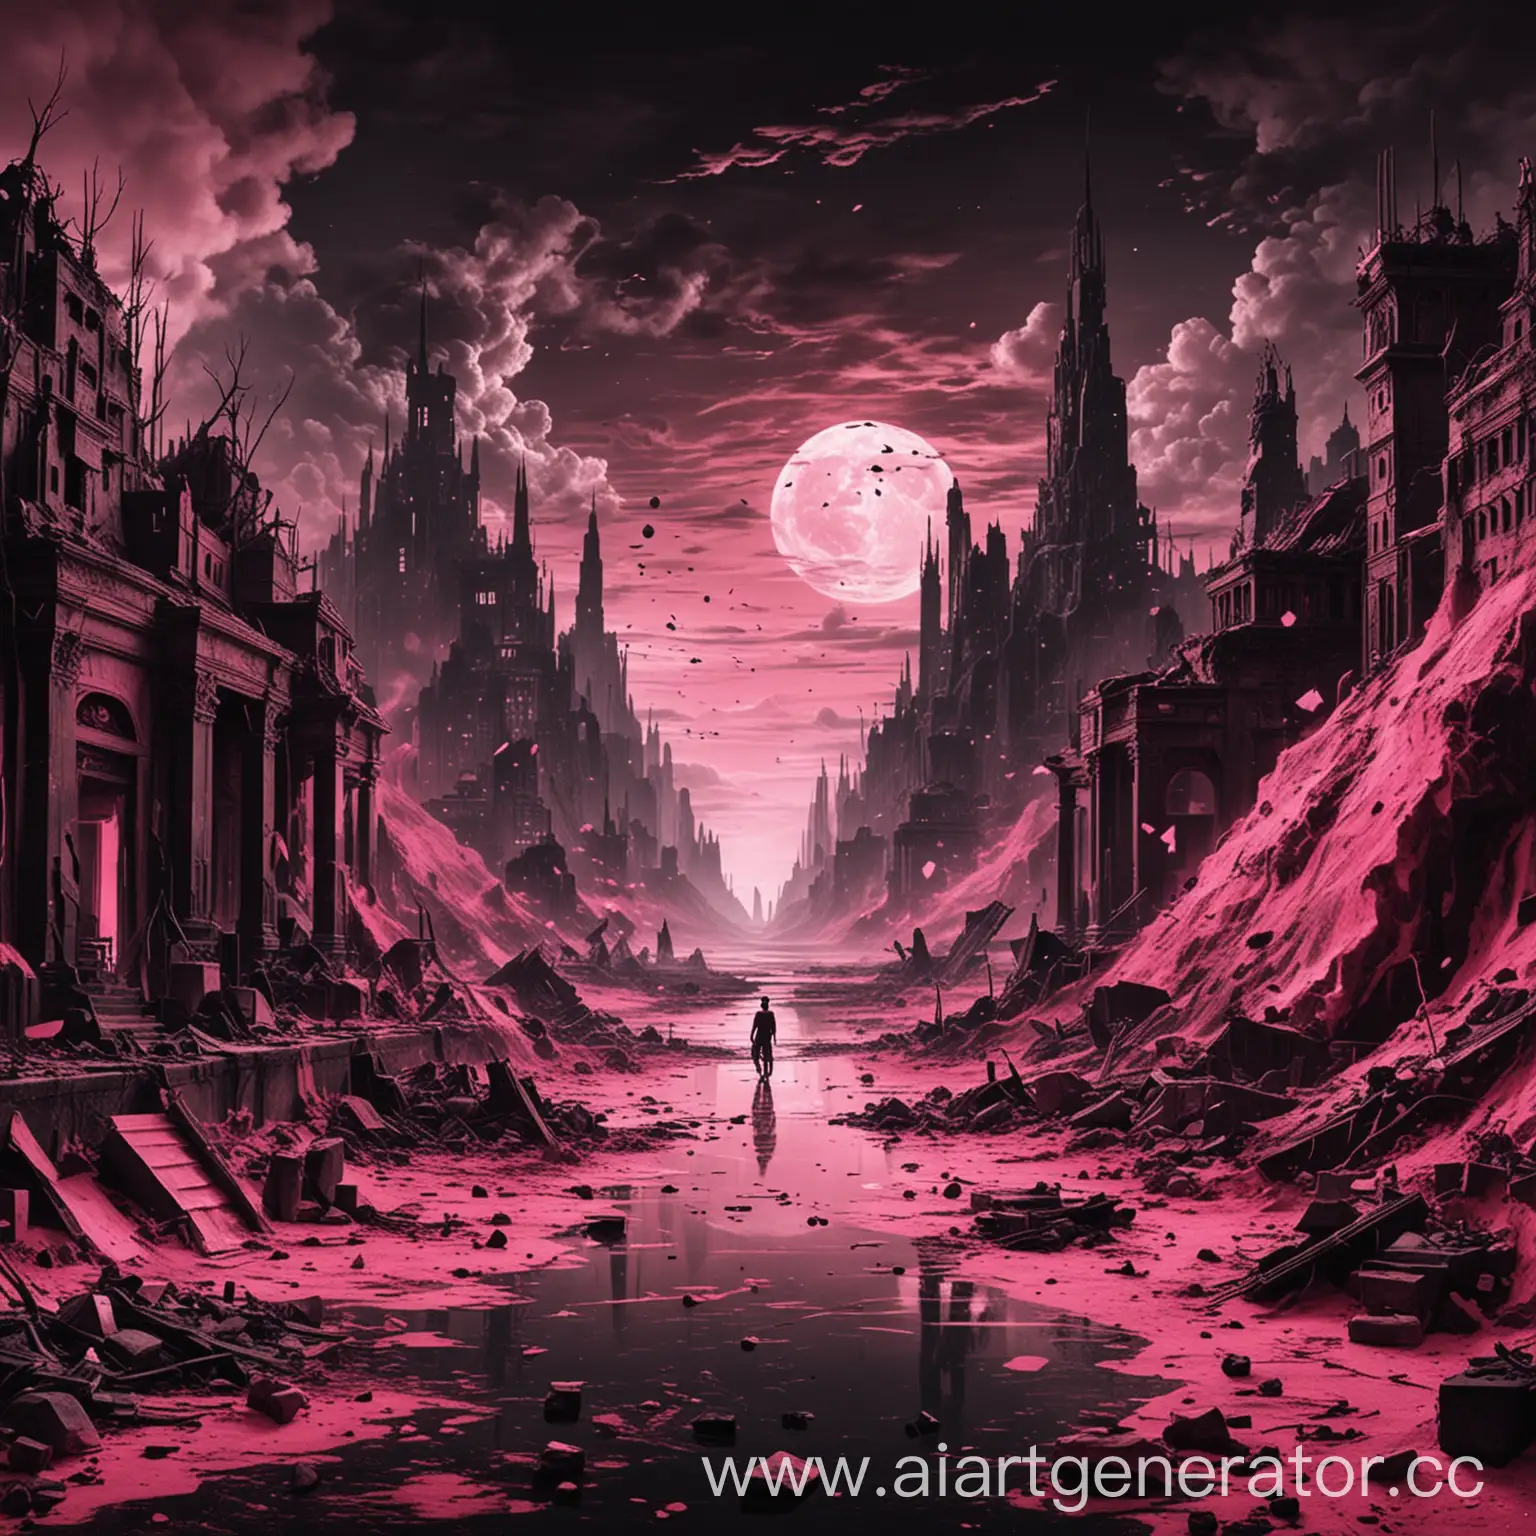 Exploring-the-Dystopian-Effects-of-Civilization-in-Pink-and-Black-Tones